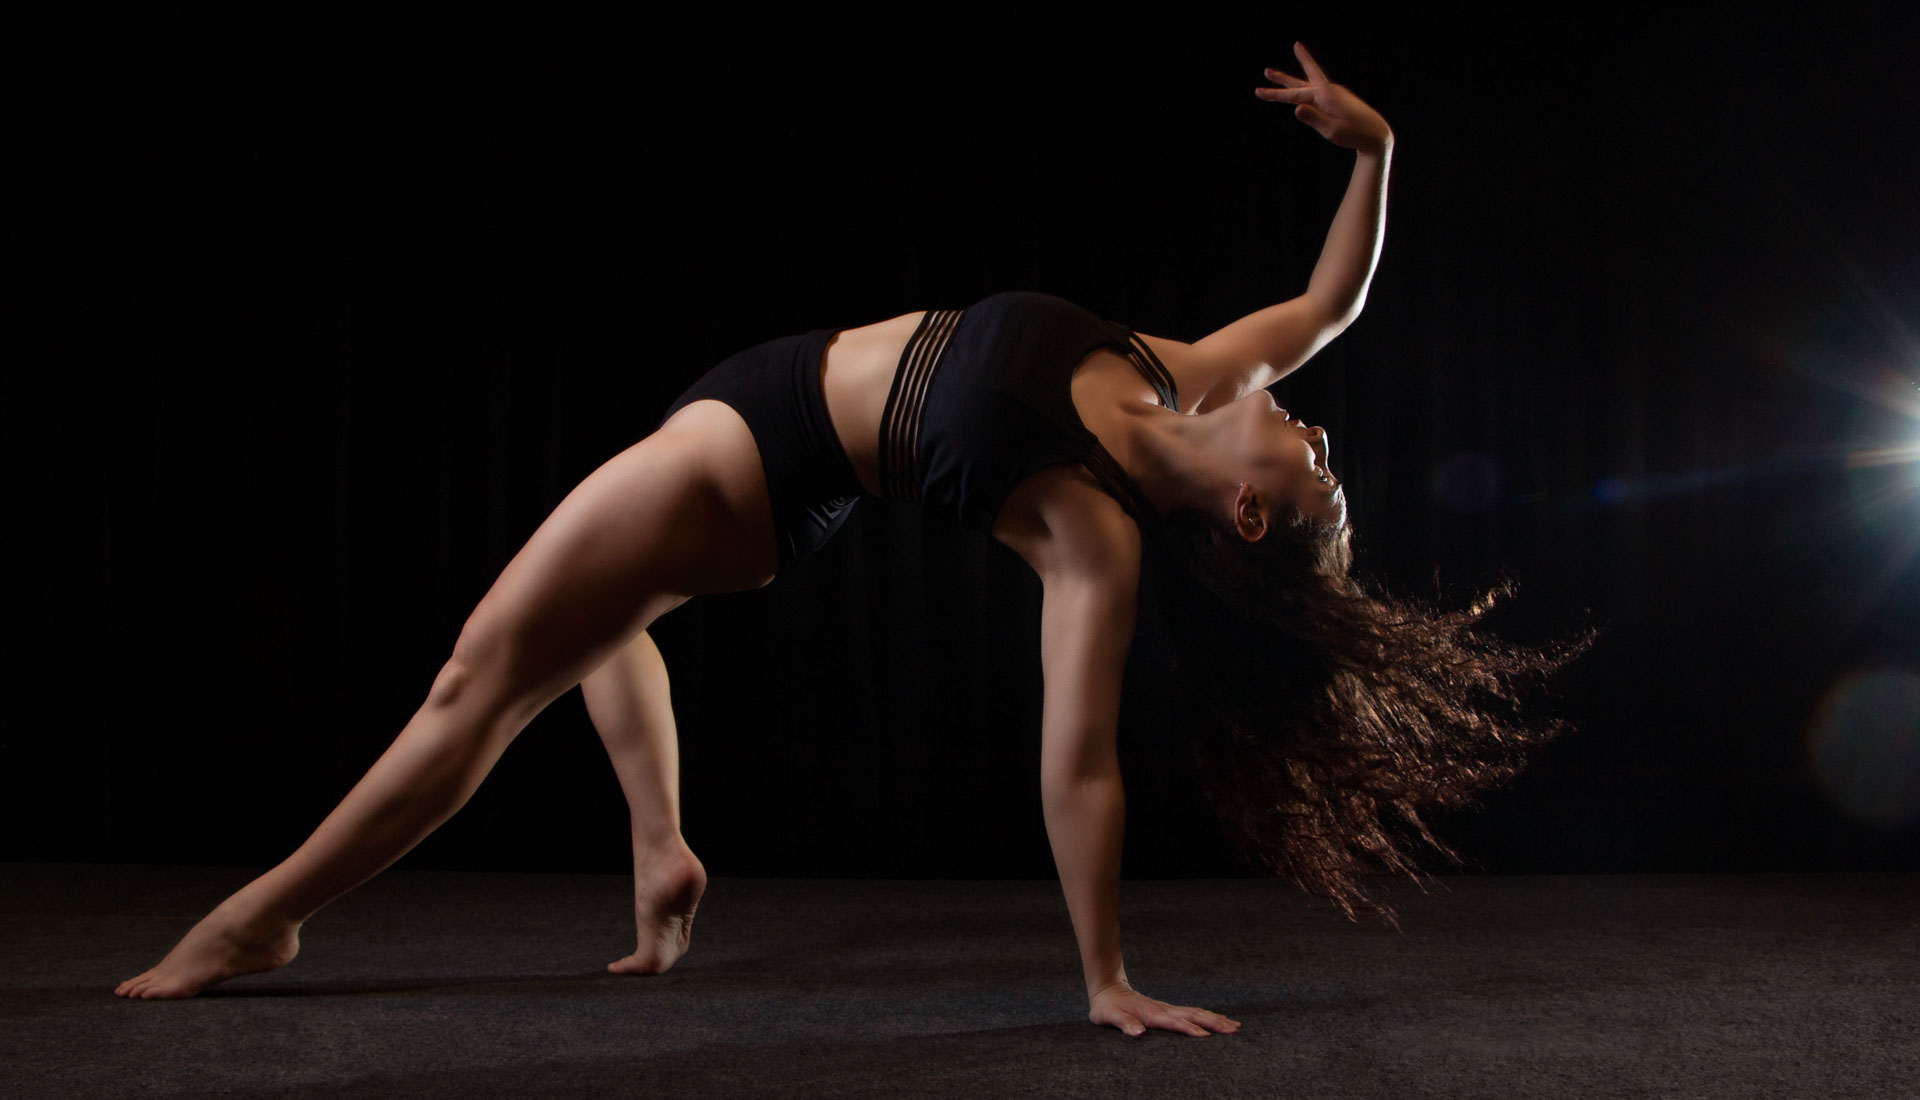 Female dancer wearing black crop top and shorts in motion. Dance and performance portfolios in West Midlands